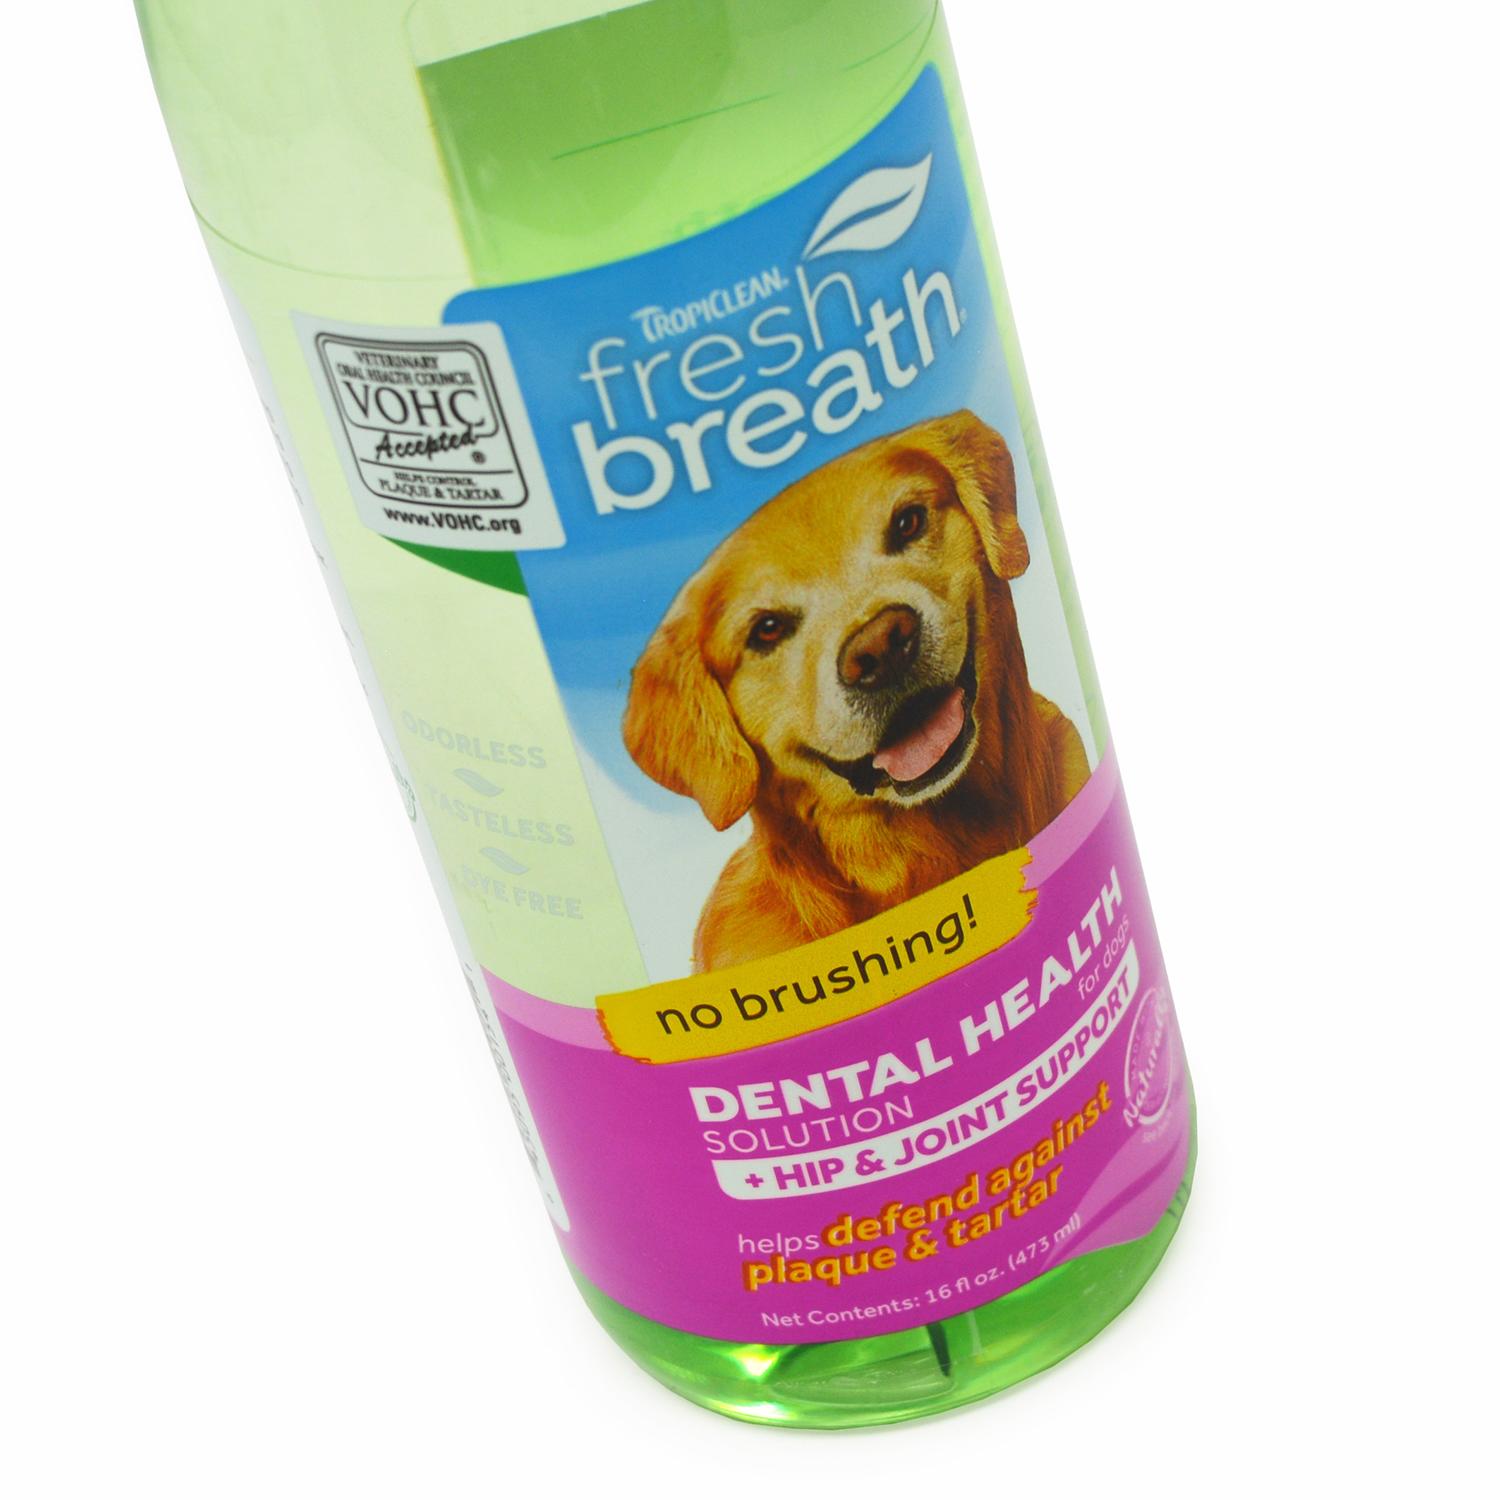 Close up of a bottle of TropiClean Pet Oral Care water for Hip and Joint Health